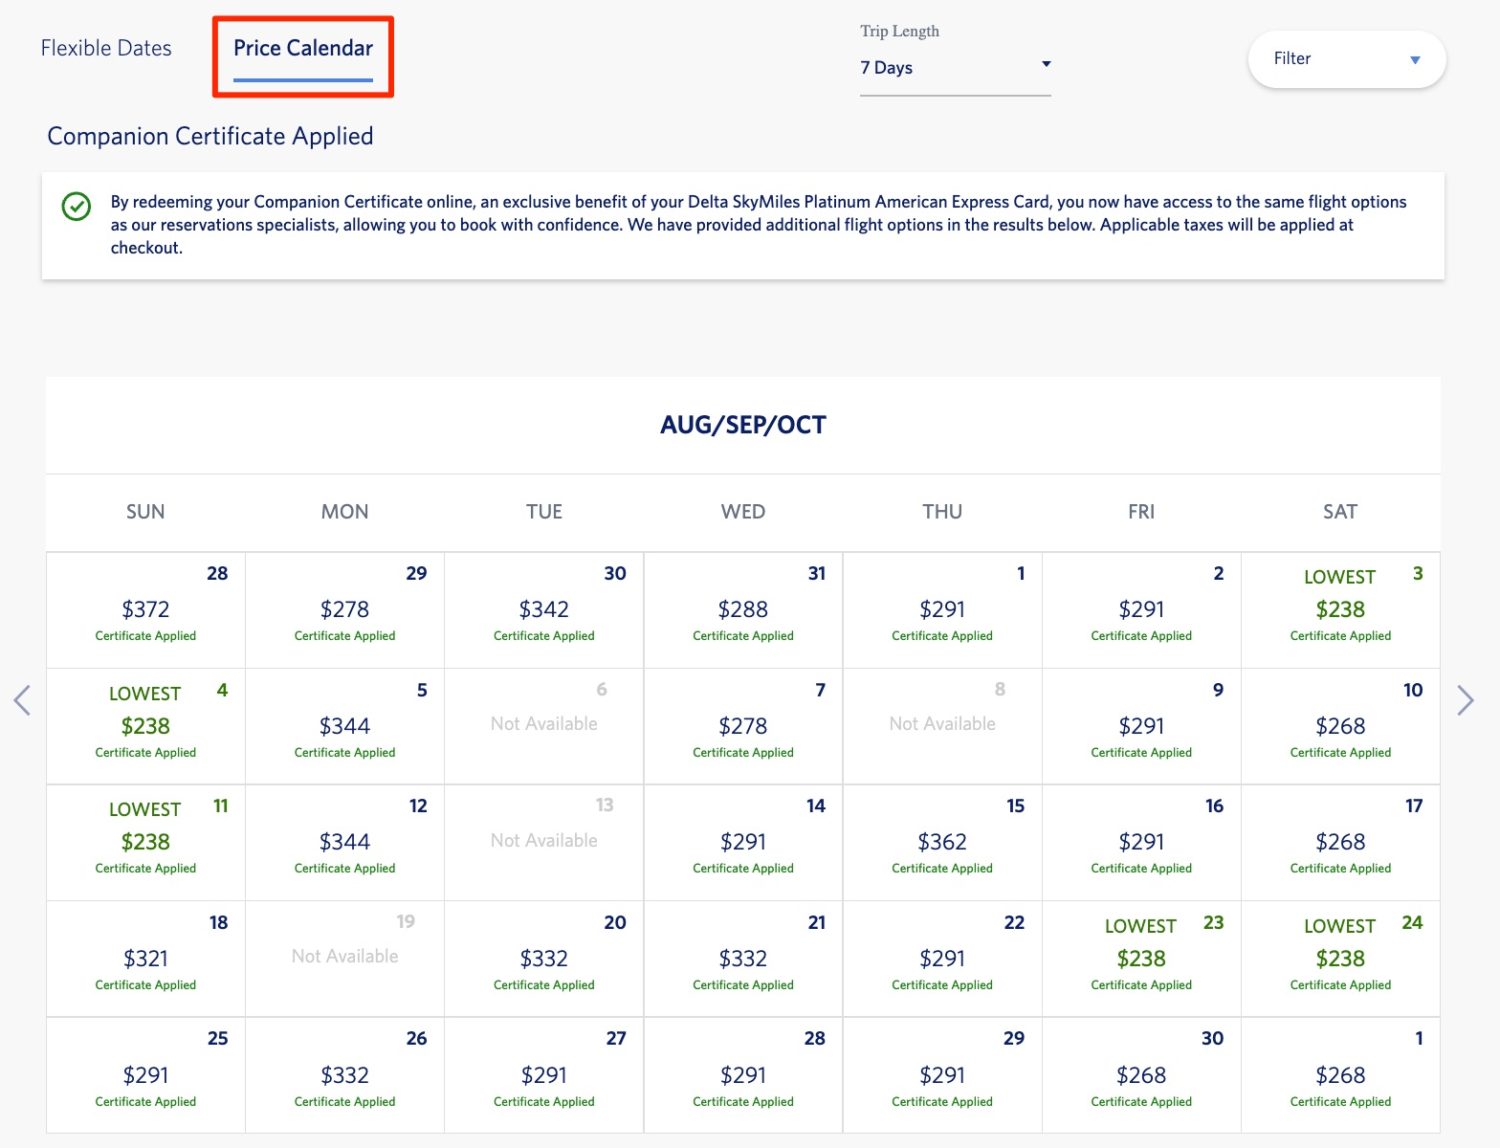 delta companion certificate price calendar  Delta Makes it Much Easier to Find Flights for Companion Certificates &#8211; Thrifty Traveler delta companion certificate price calendar scaled